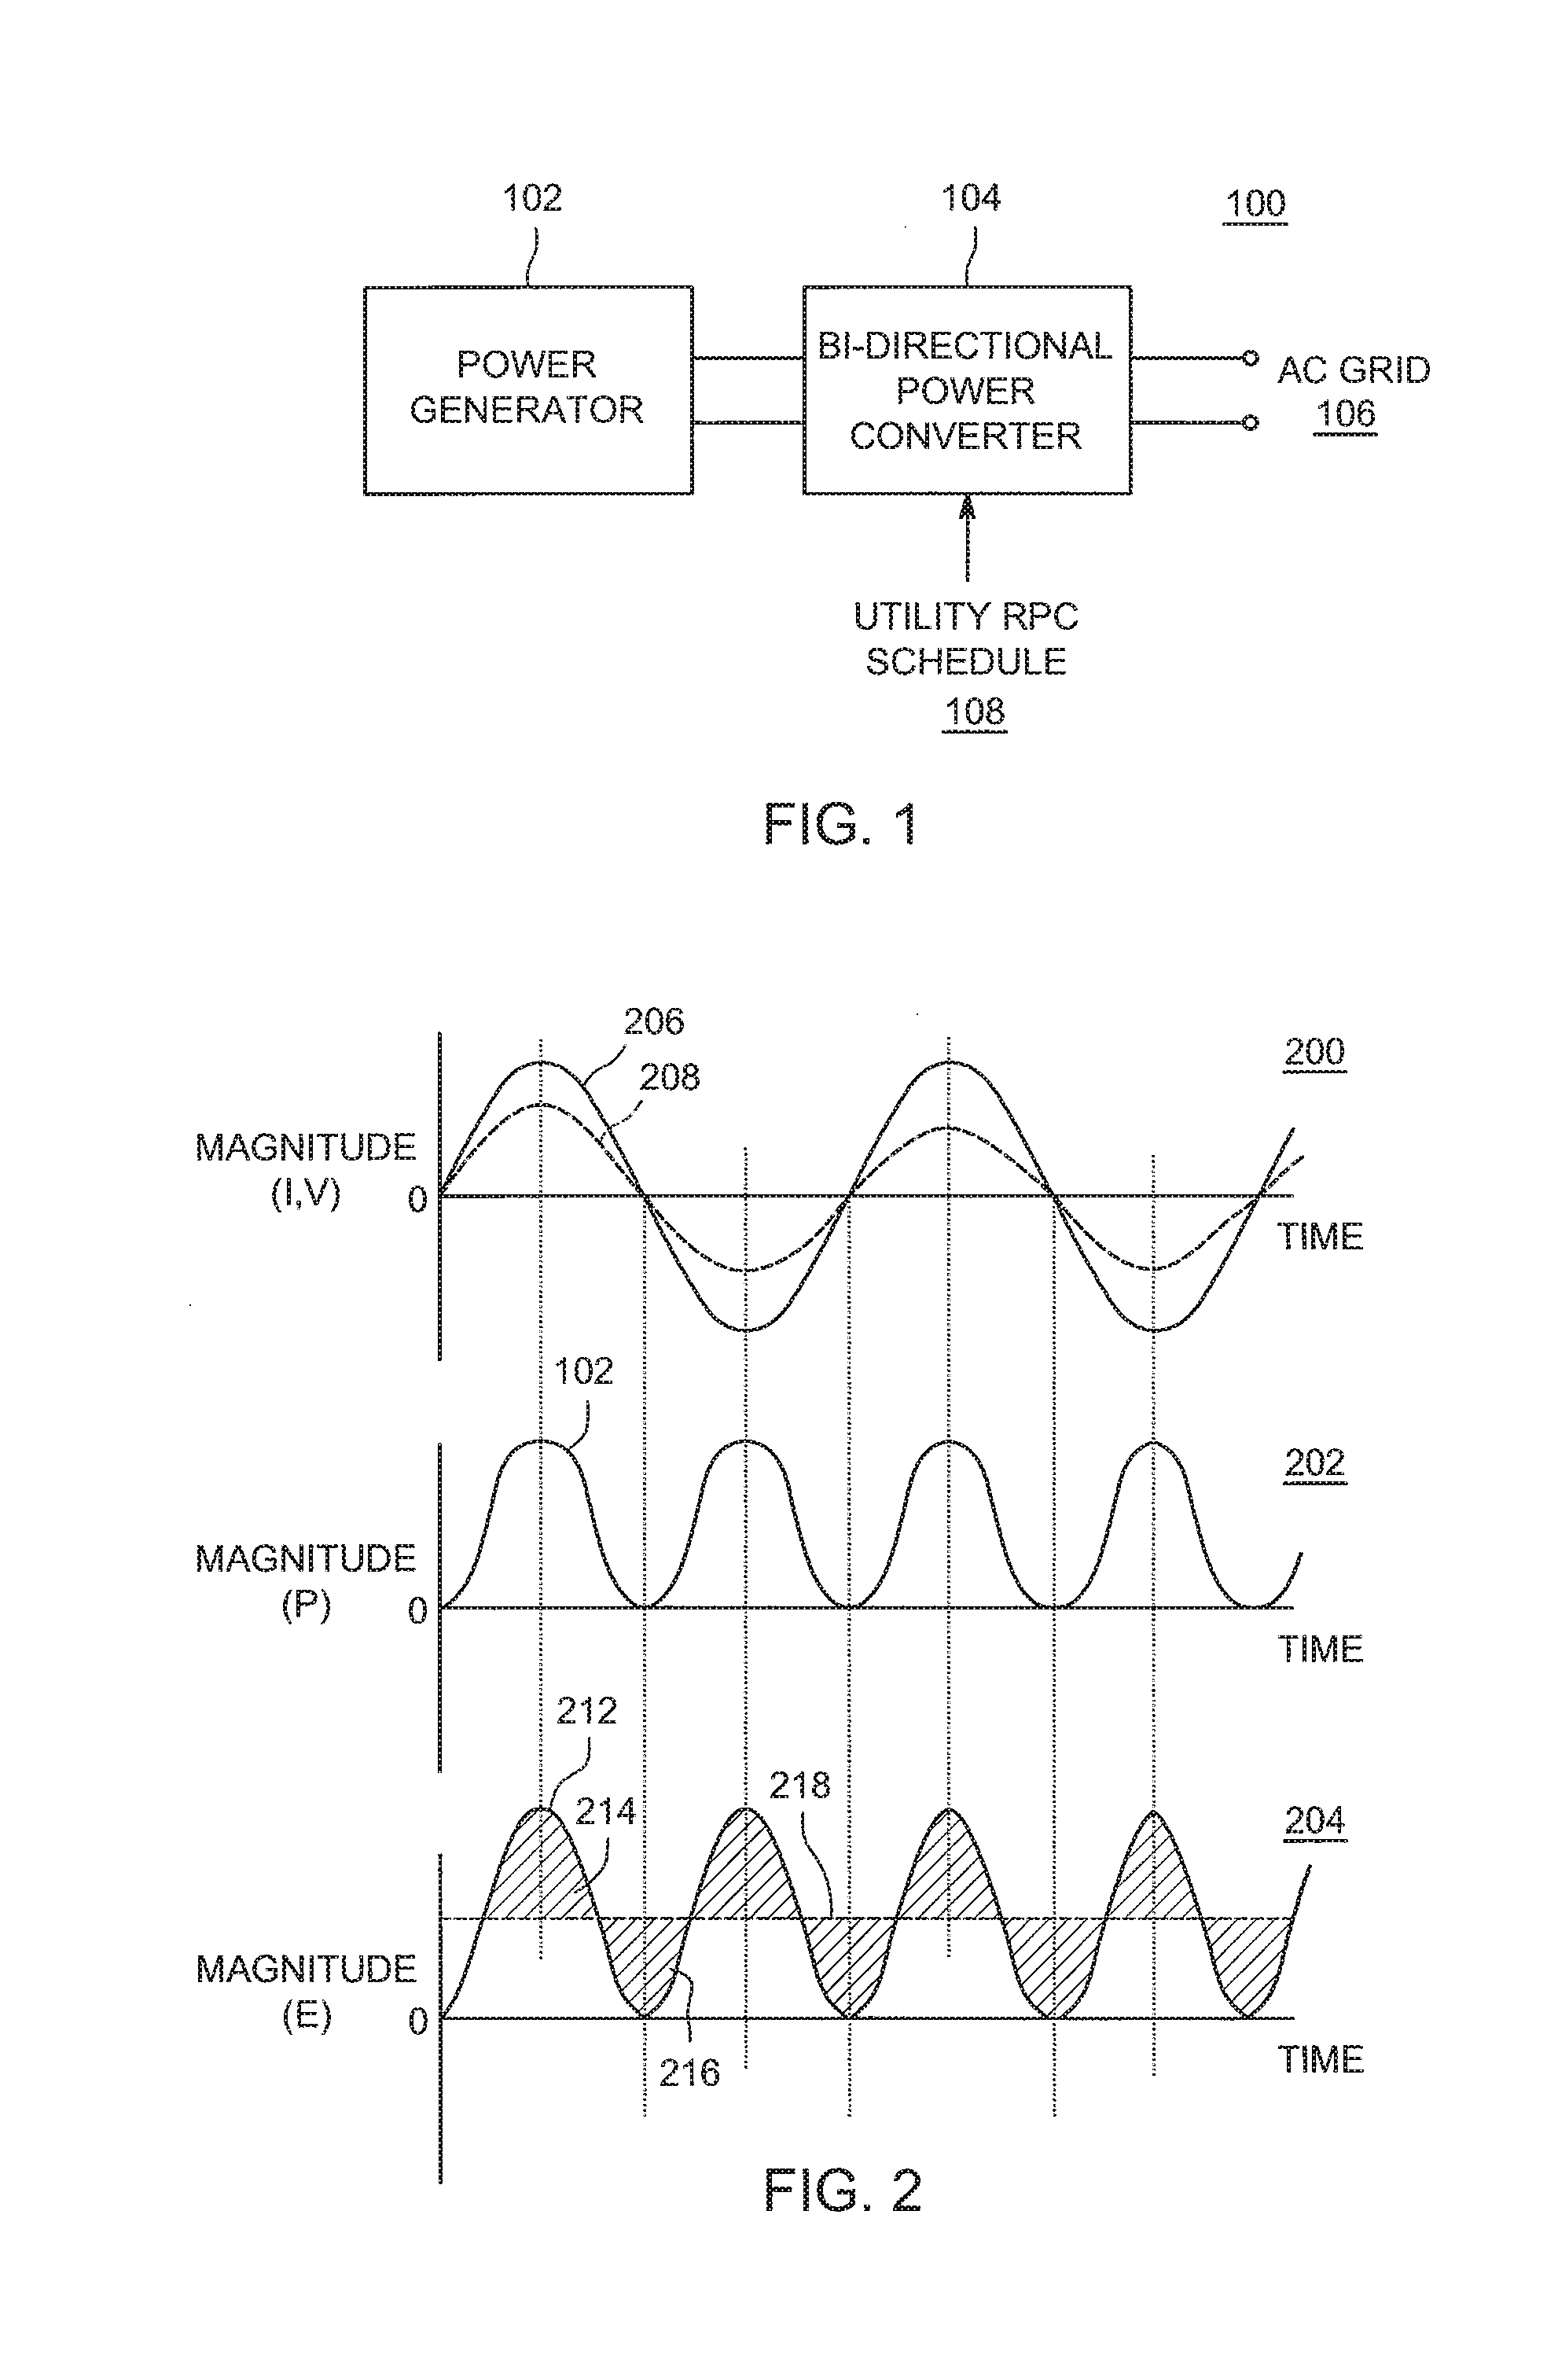 Apparatus and method for reactive power control